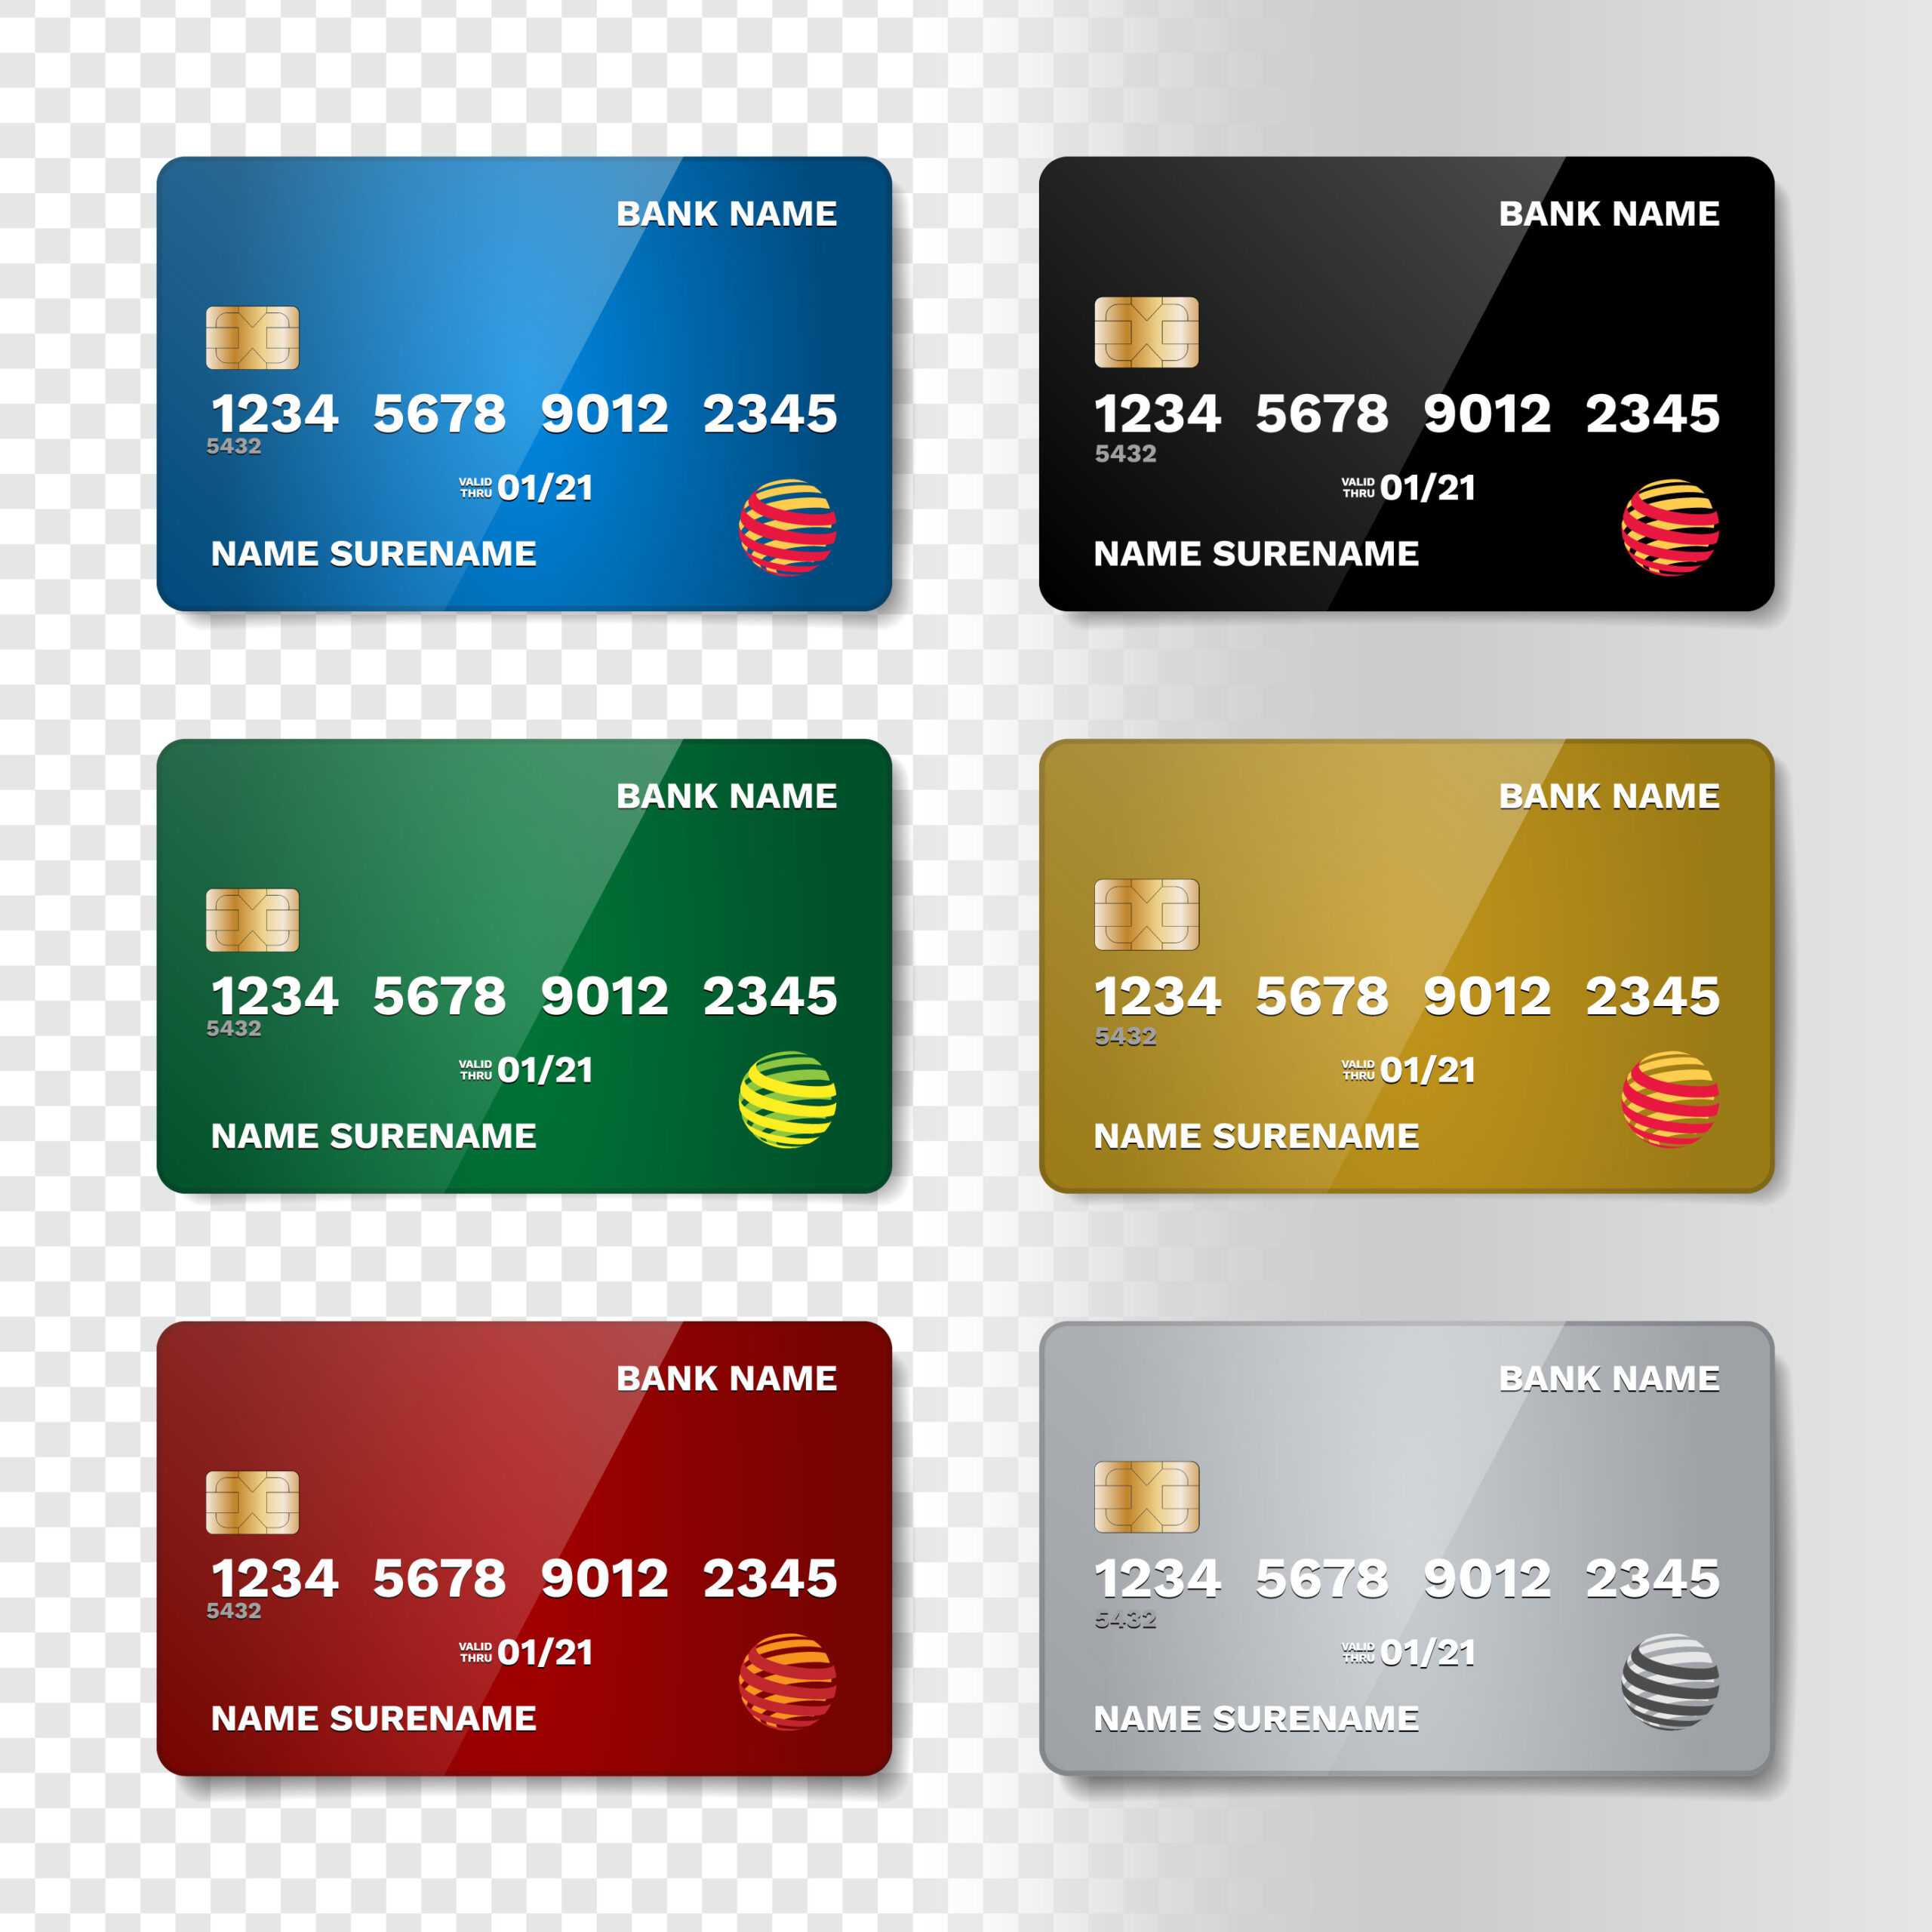 Realistic Credit Card Set – Download Free Vectors, Clipart With Credit Card Templates For Sale